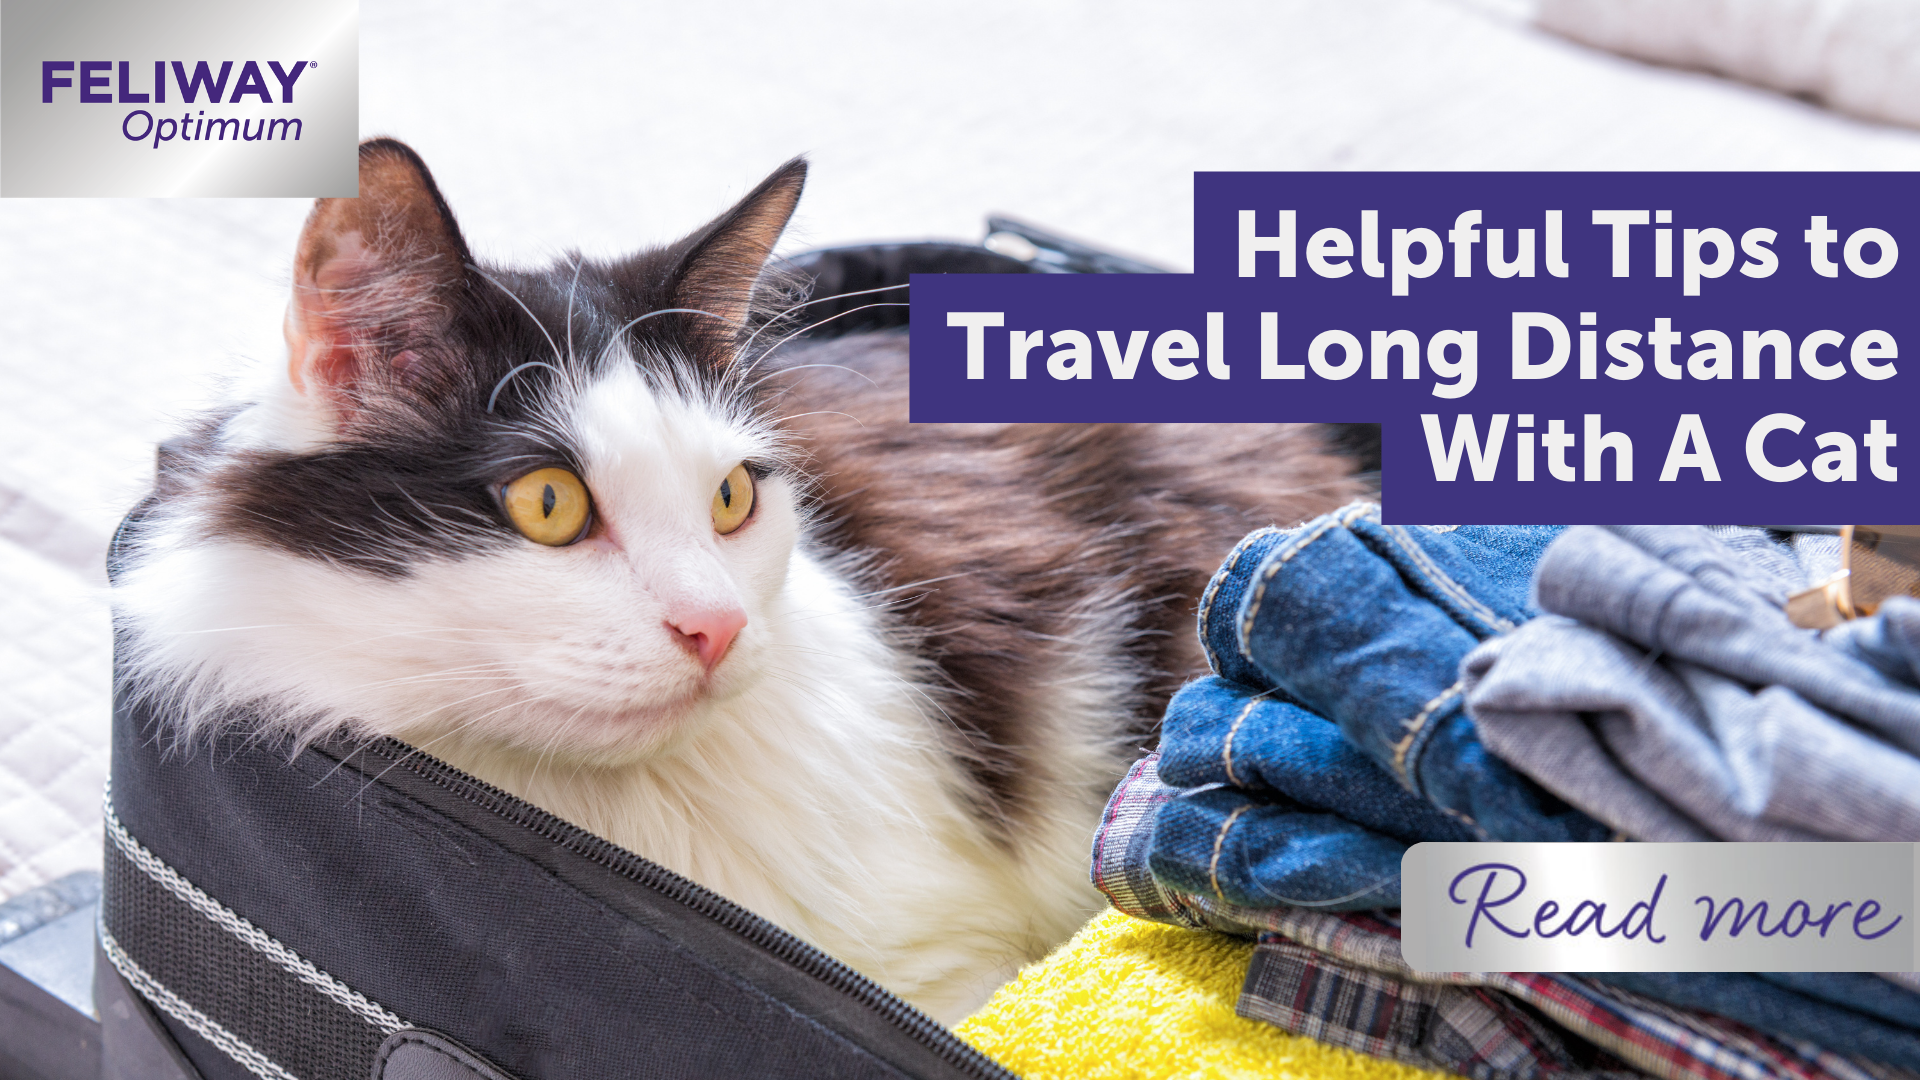 Helpful Tips to Travel Long Distance With A Cat